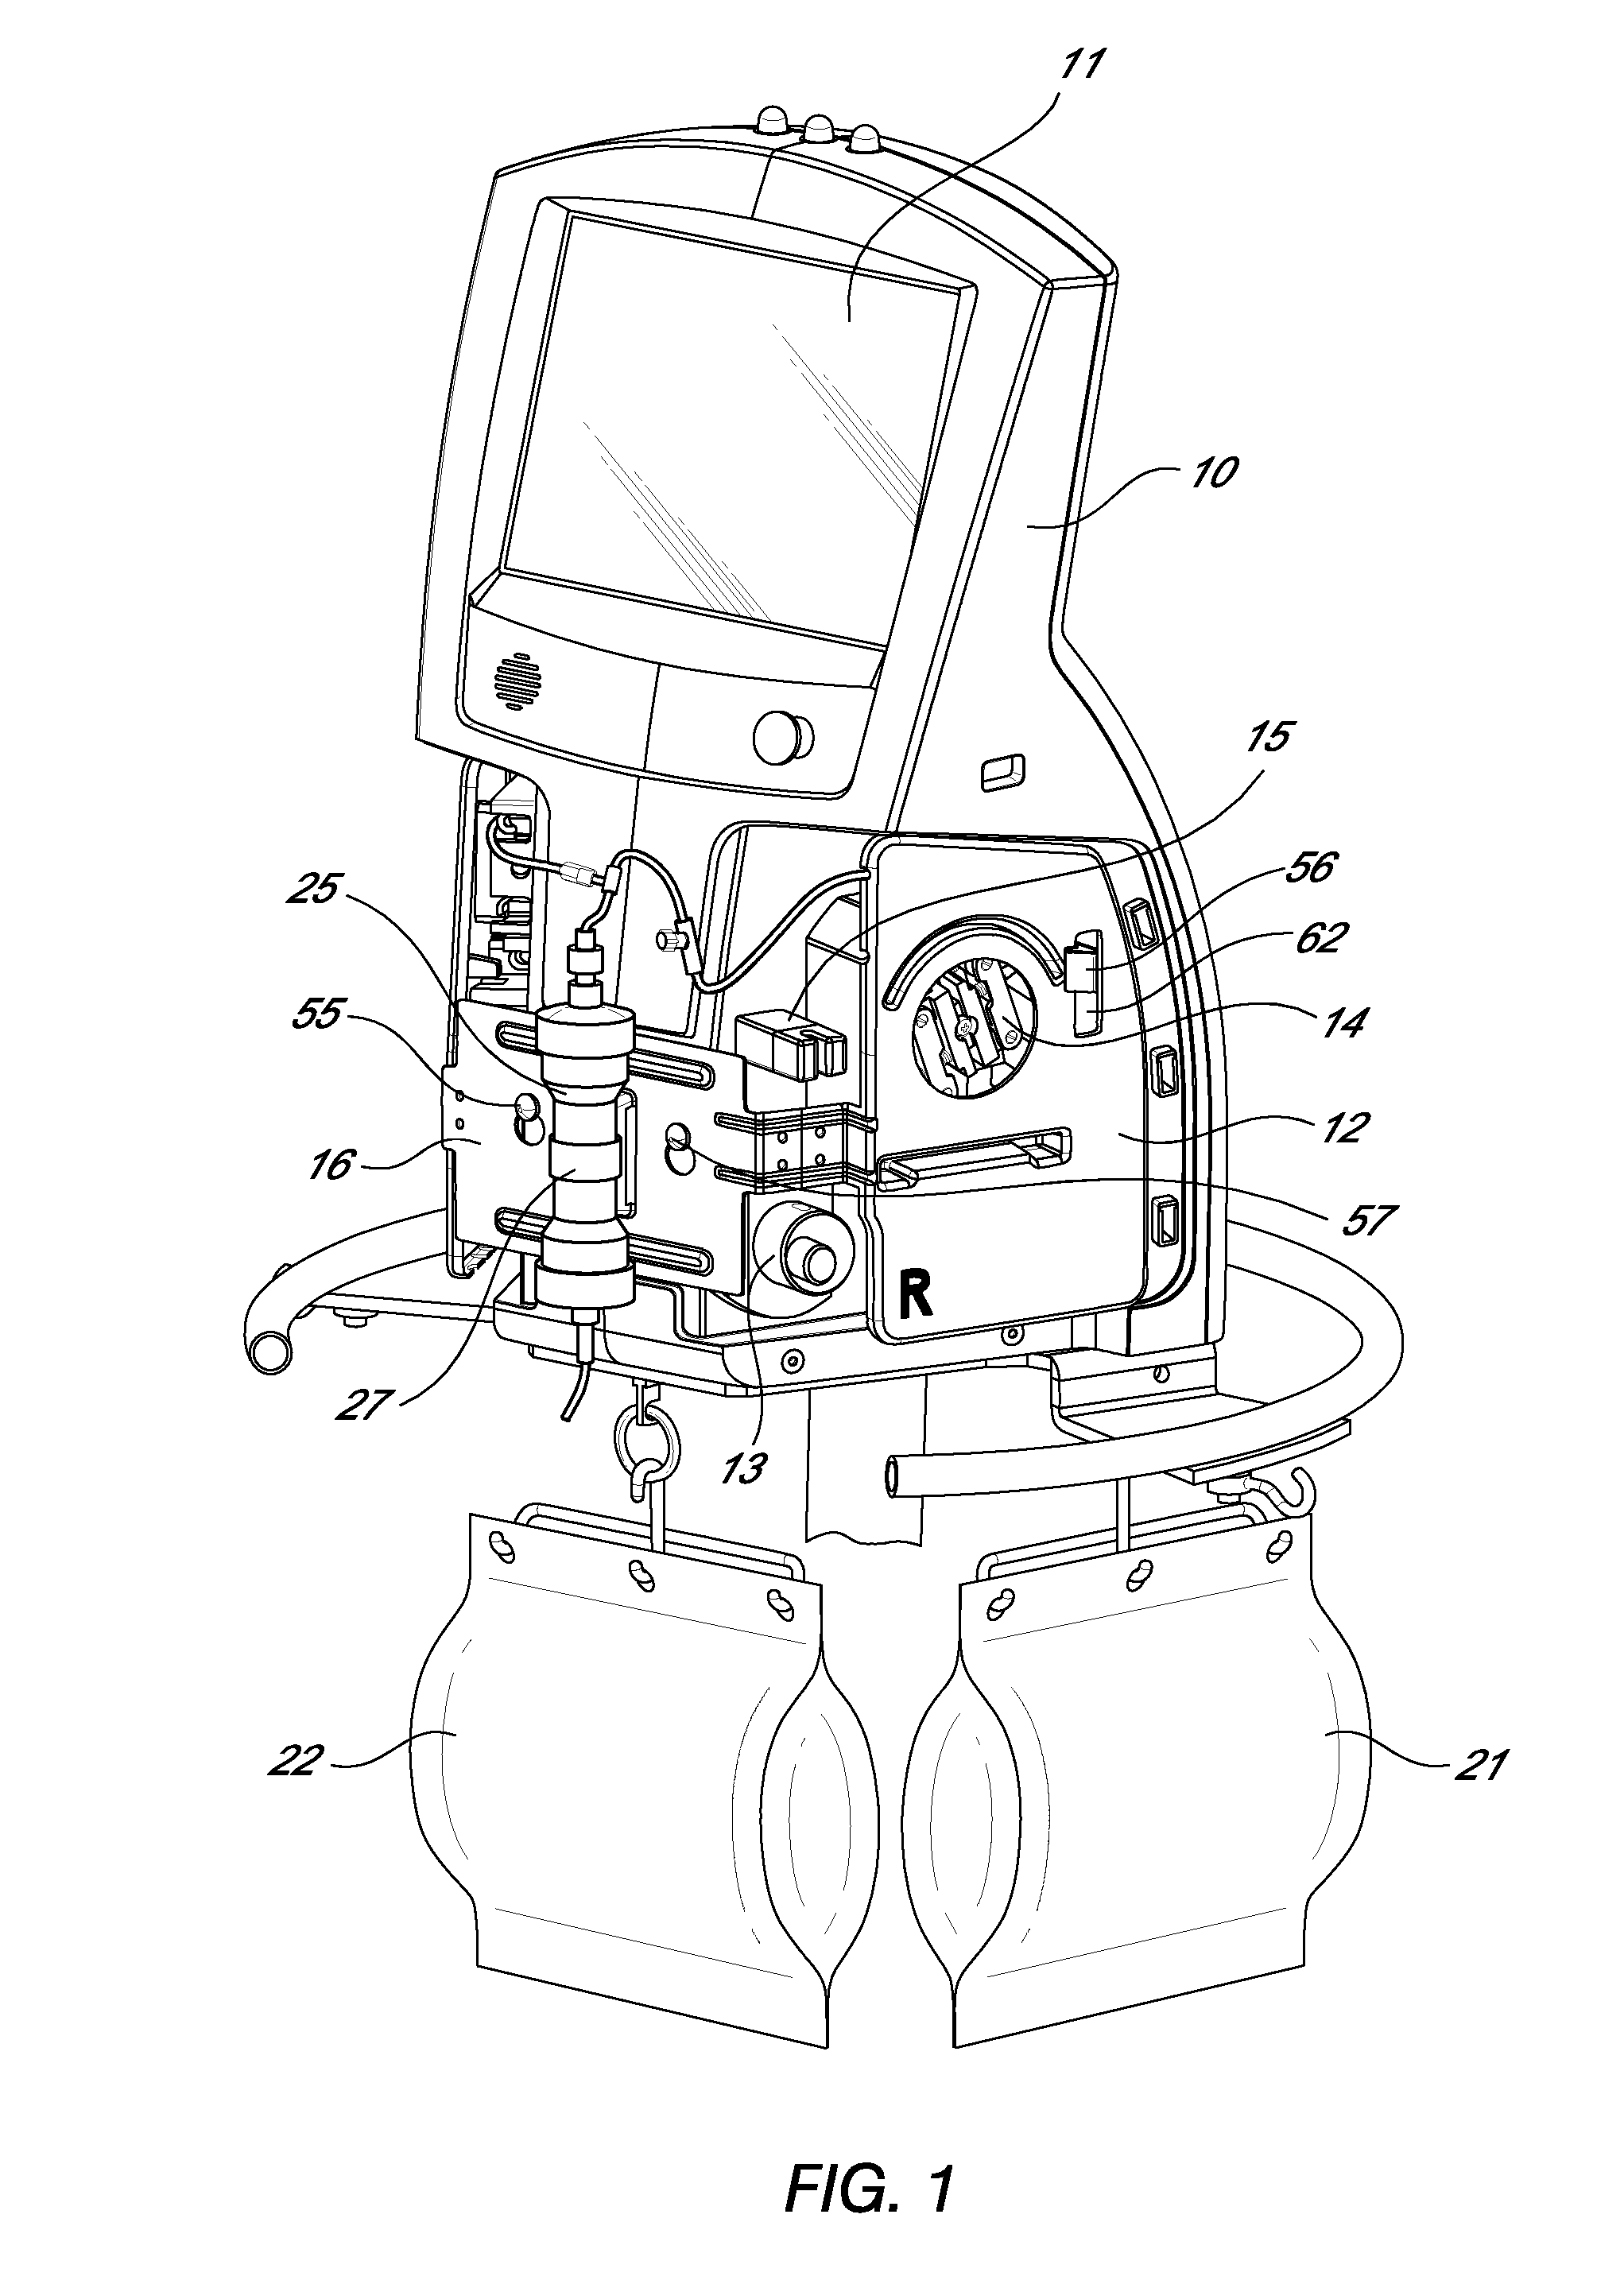 Modular hemofiltration apparatus and method for carrying out neonatal and pediatric crrt